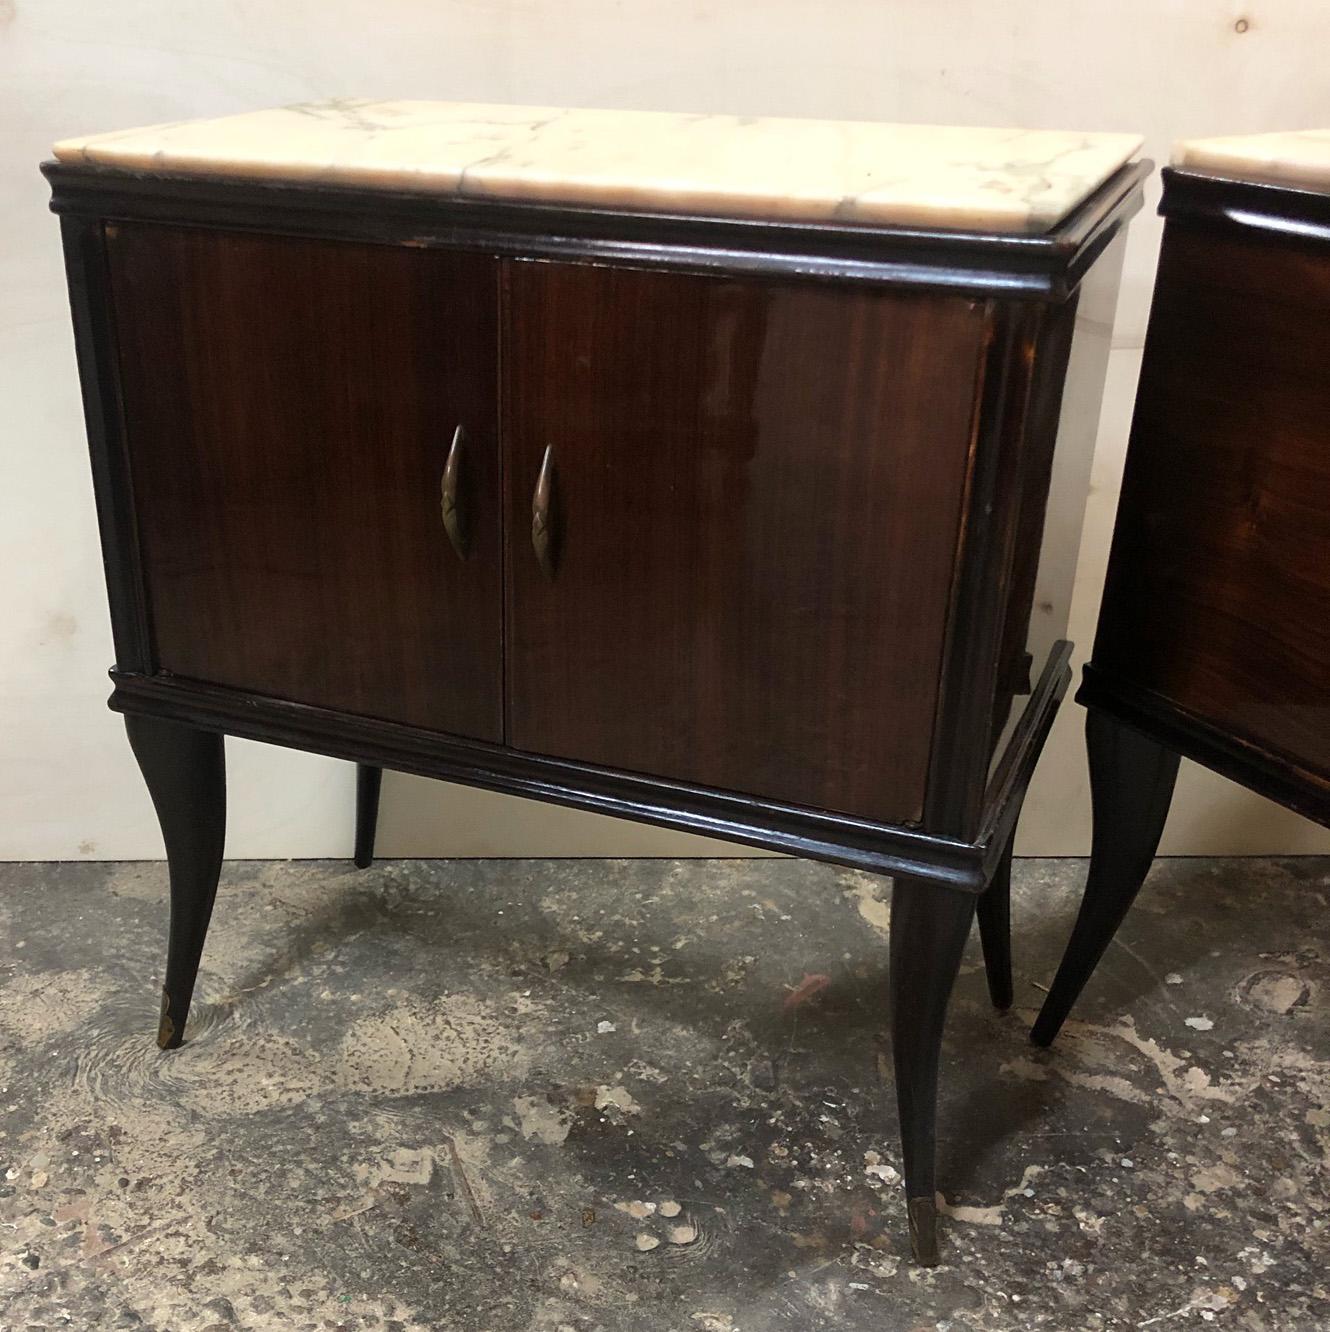 Pair of Italian night stands dating back to the mid-1900s. 
The coloring is original in patinain and wood walnut with cream marble.
Original color and handles.
Comes from an old elegant house in the Pisa area of Tuscany.
As shown in the